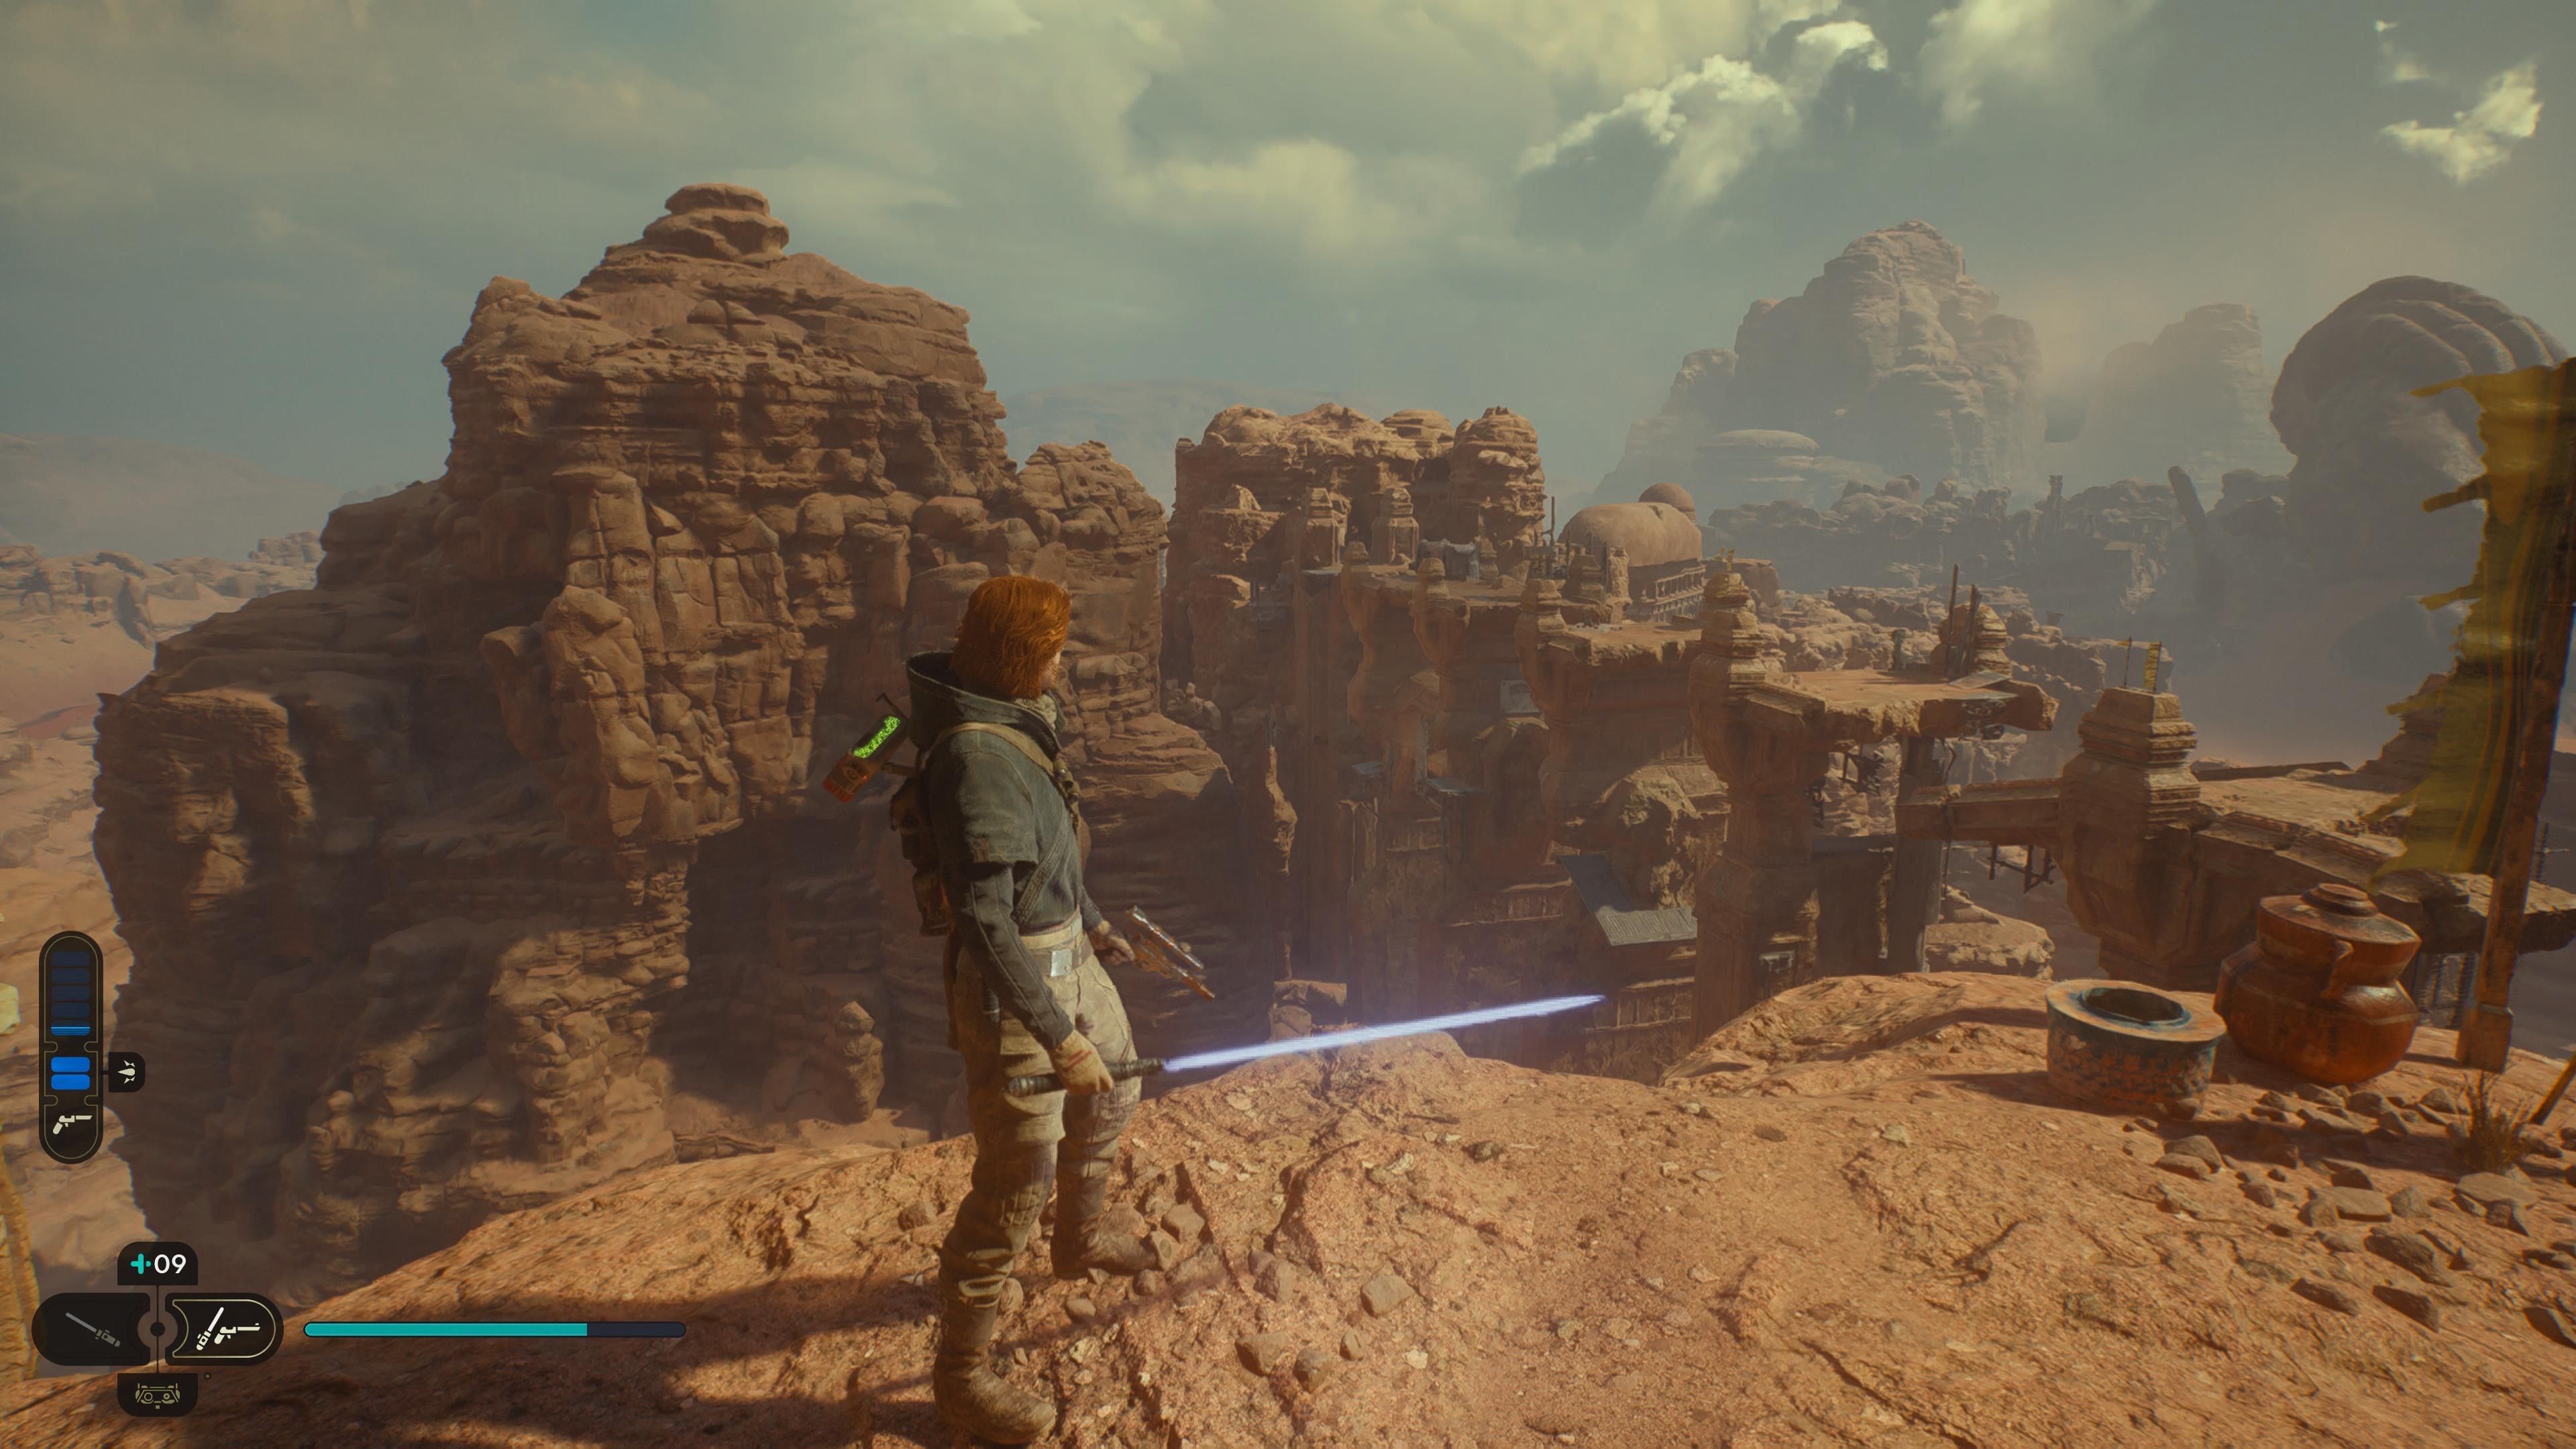 Gameplay screenshot of Cal Kestis standing on a cliff overlooking Jedi ruins on the planet Jedha in Star Wars Jedi: Survivor.